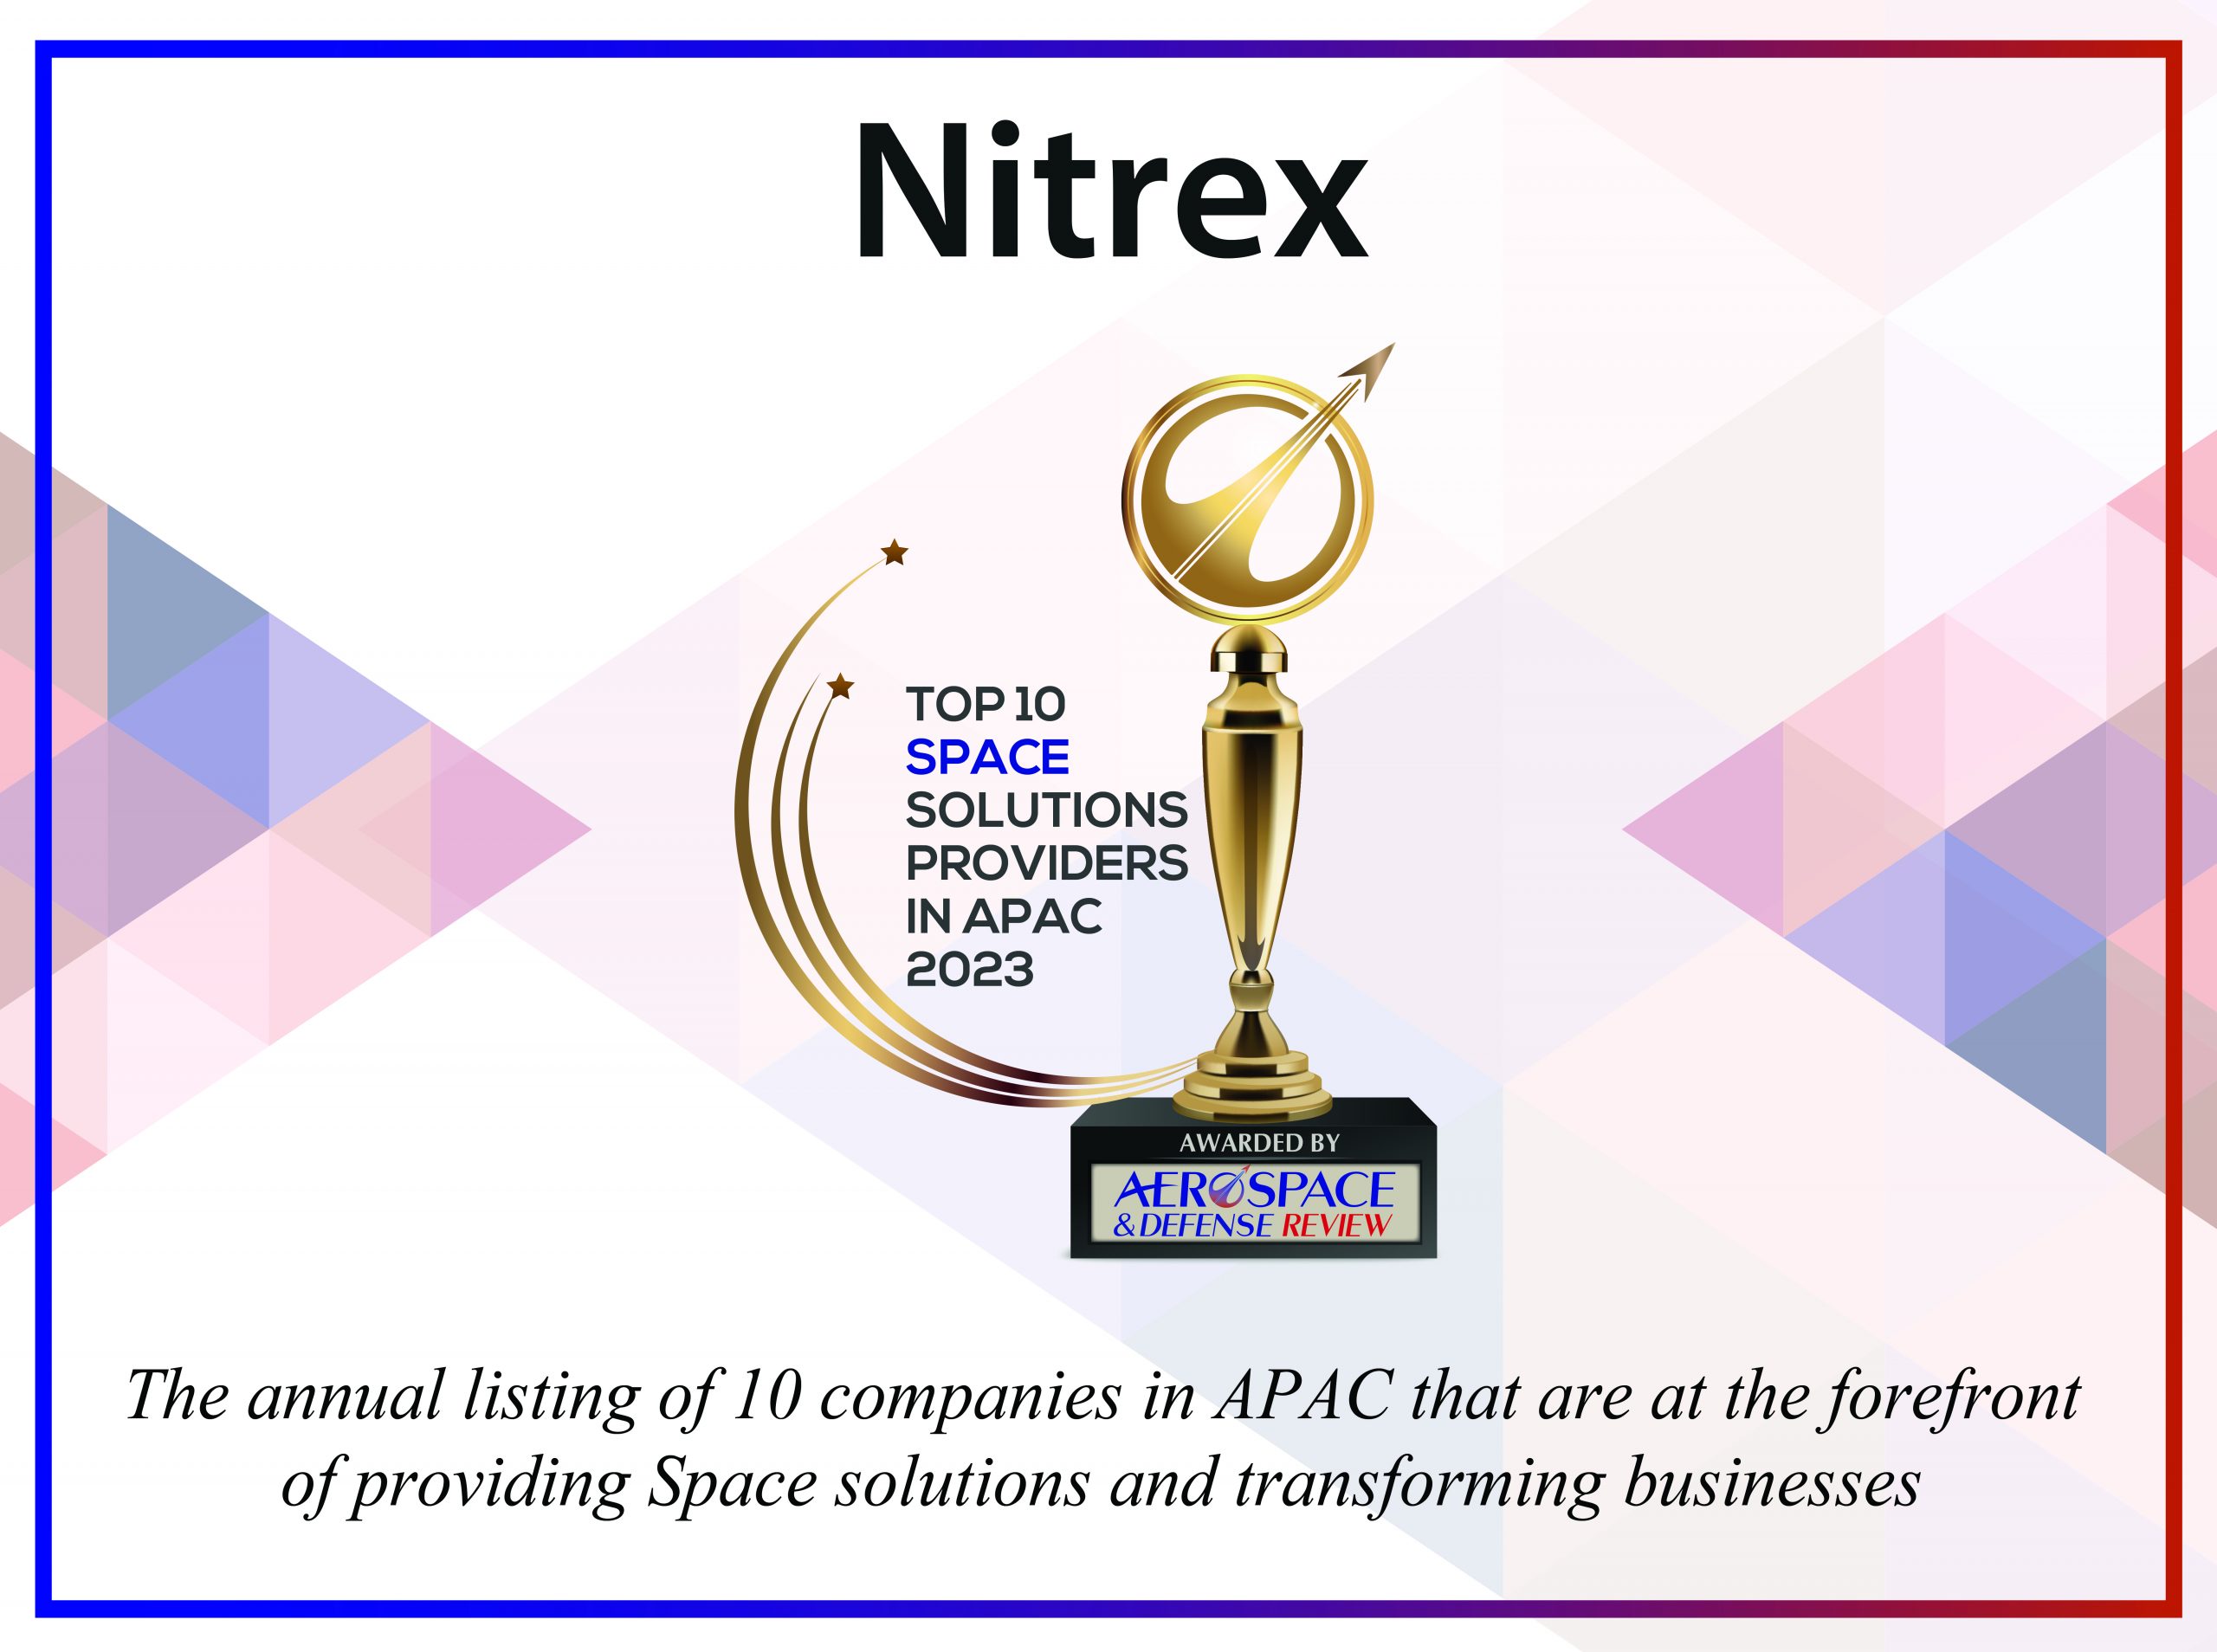 Proud recipient of the TOP 10 SPACE SOLUTION PROVIDERS IN APAC 2023 award